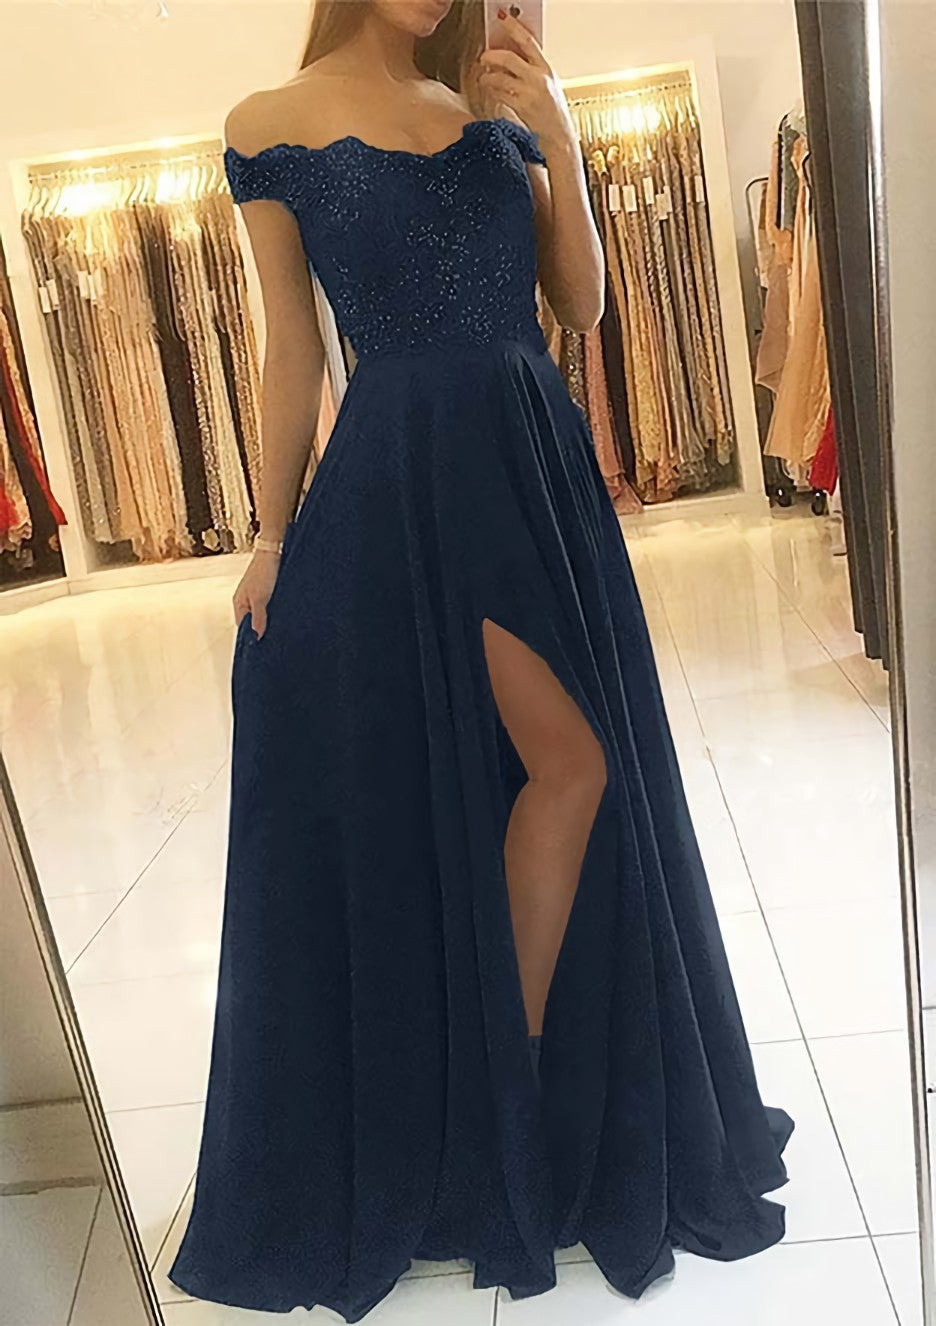 A-line/Princess Off-the-Shoulder Sleeveless Long/Floor-Length Chiffon Corset Prom Dress With Beading Split outfit, Evening Dresses Sale